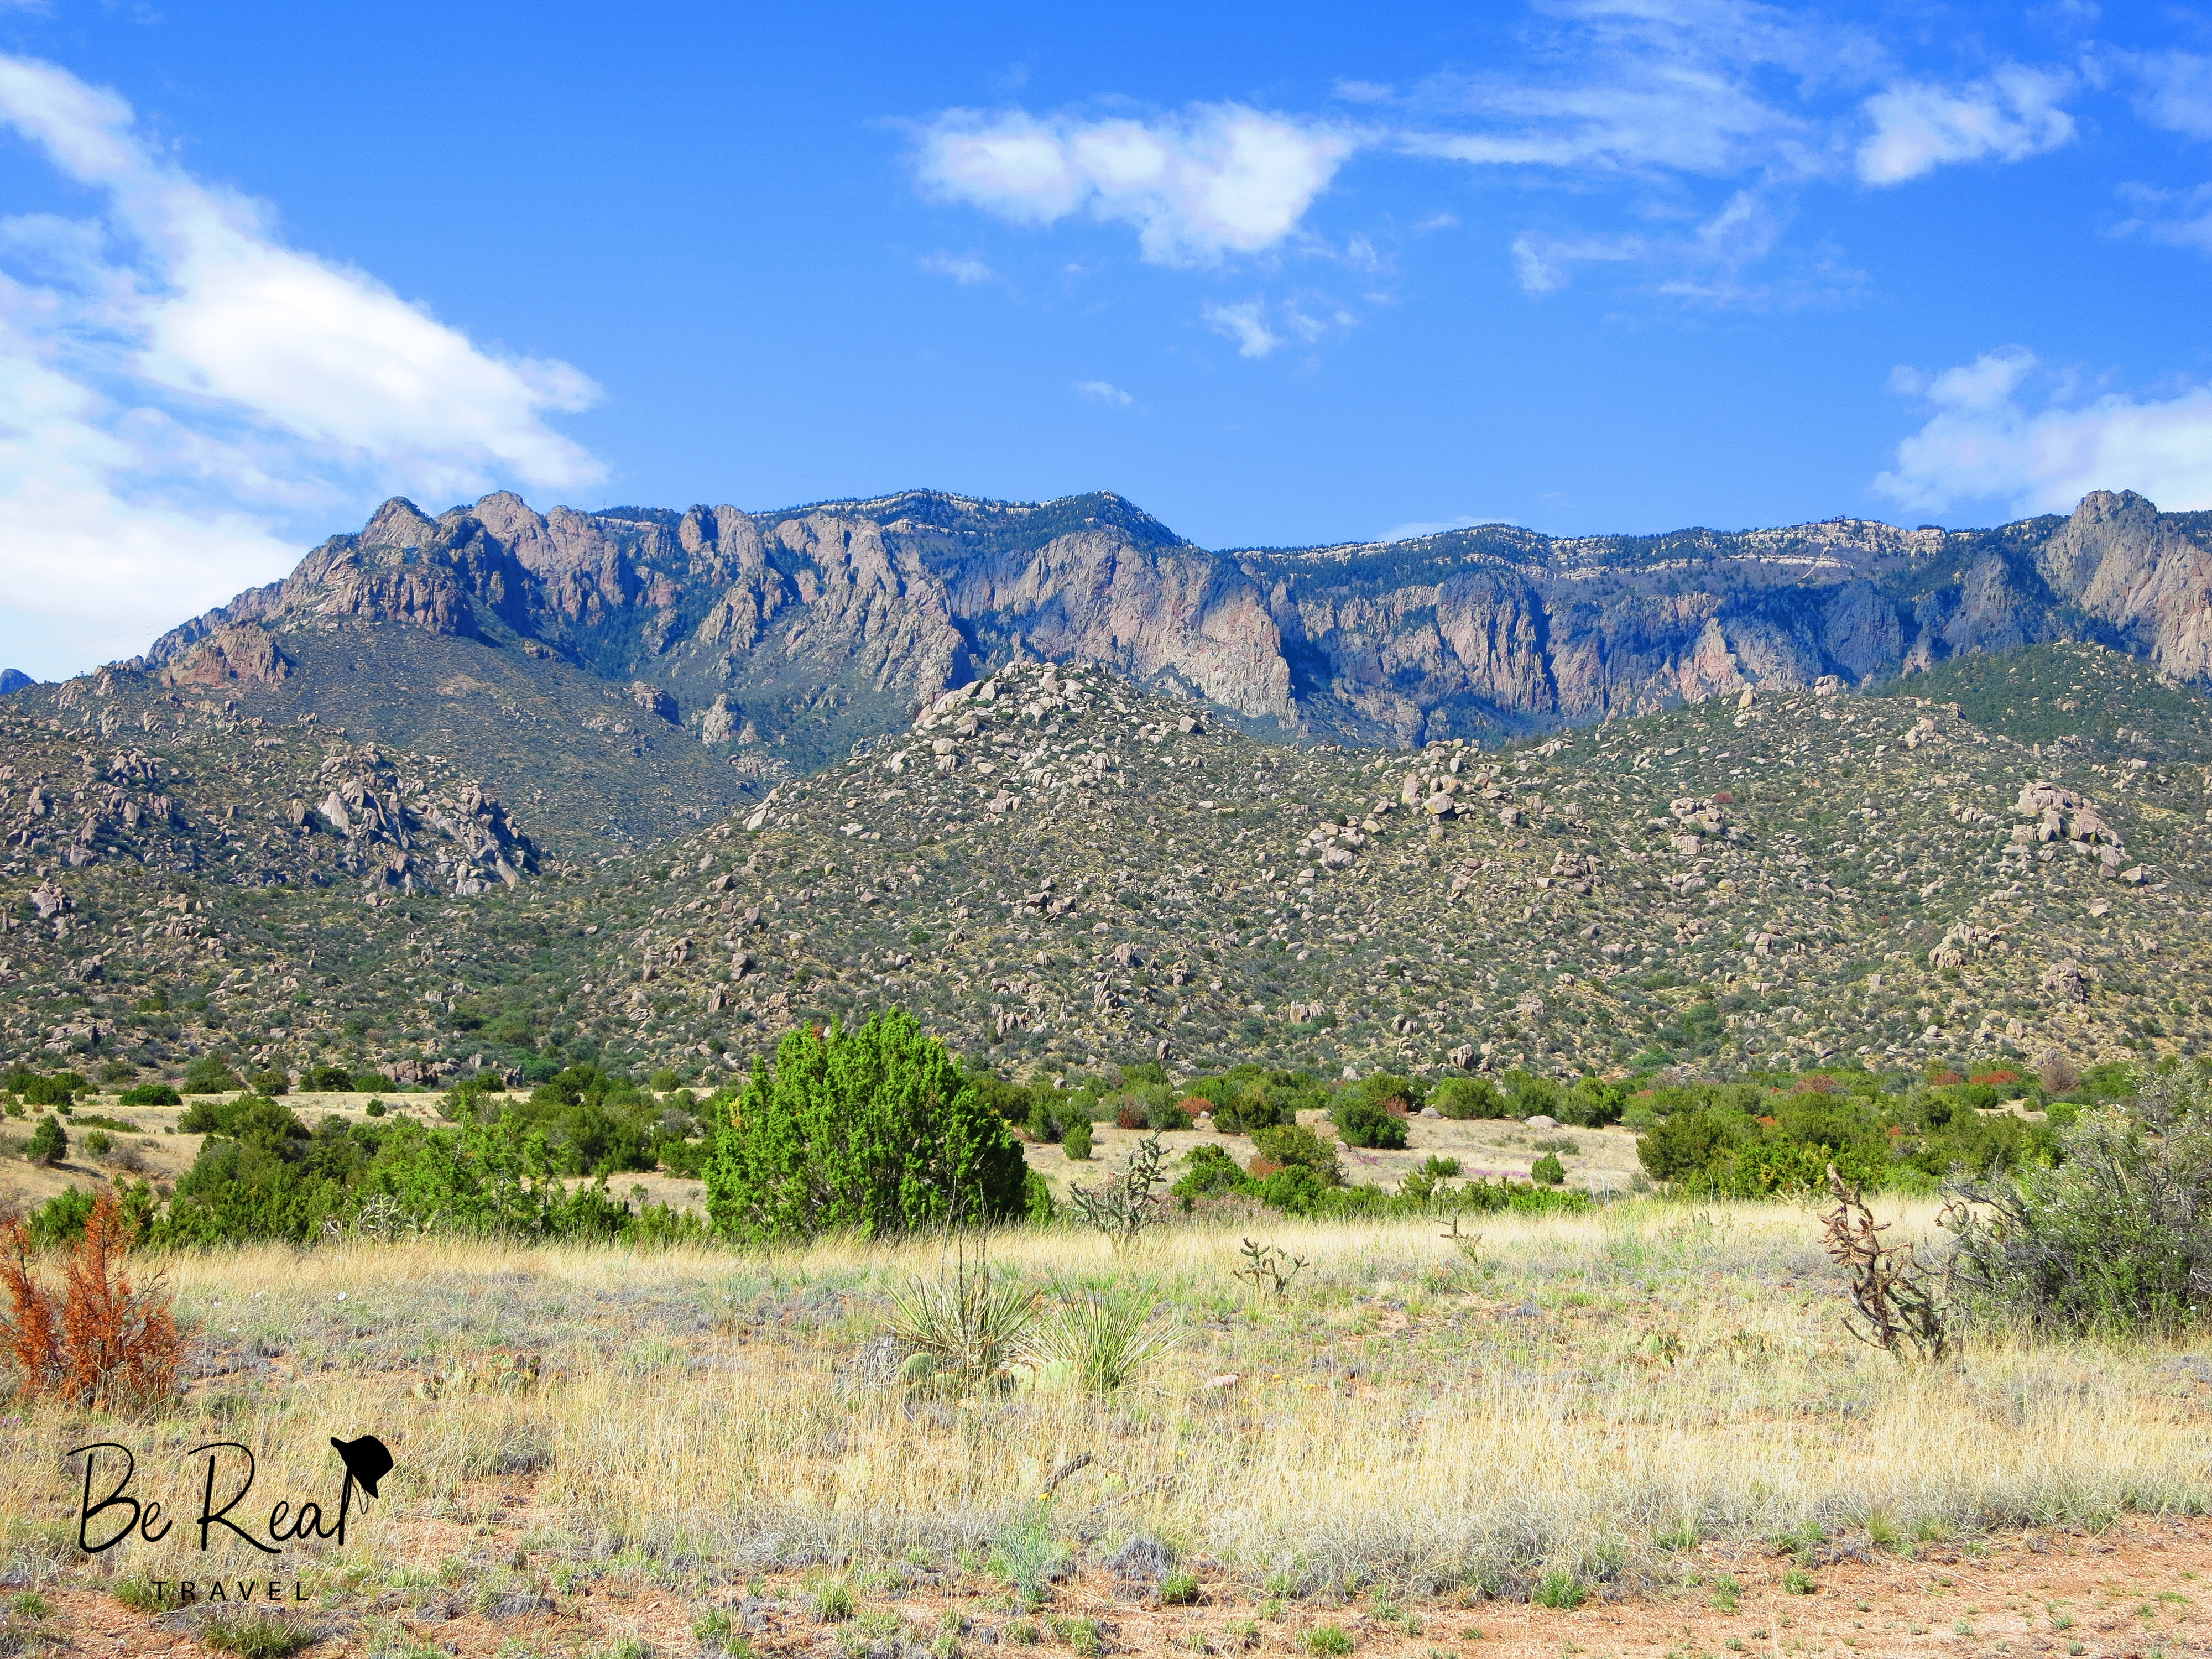 Green land gives way to the mountains and sky in New Mexico